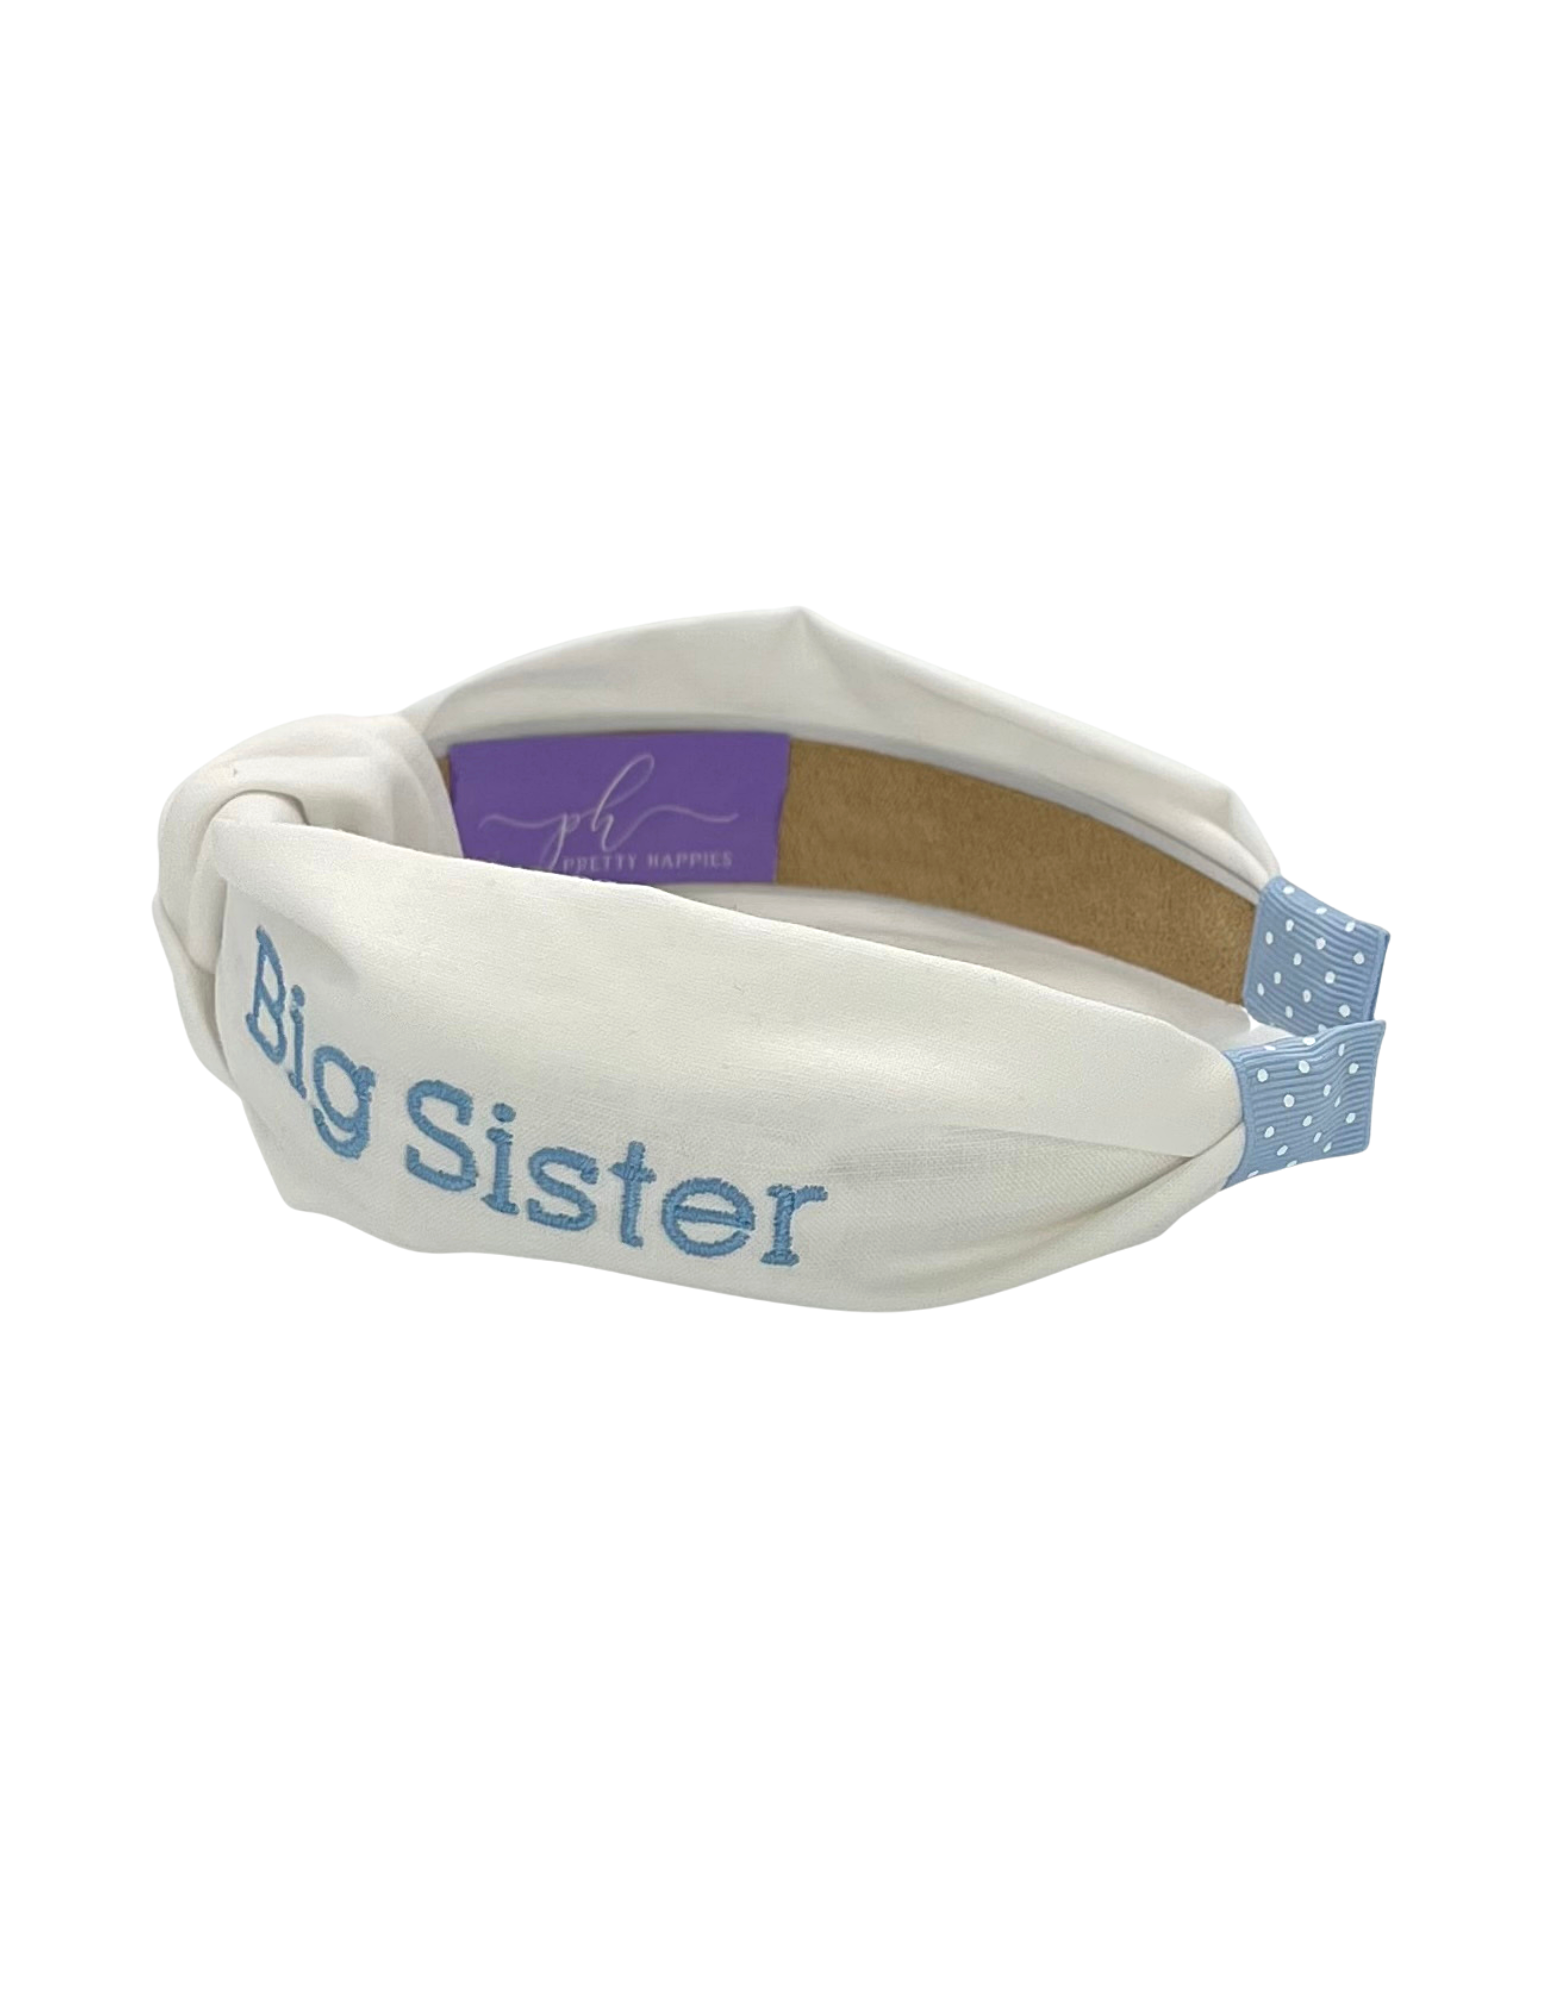 Big Sister - Blue or Pink Embroidery on White